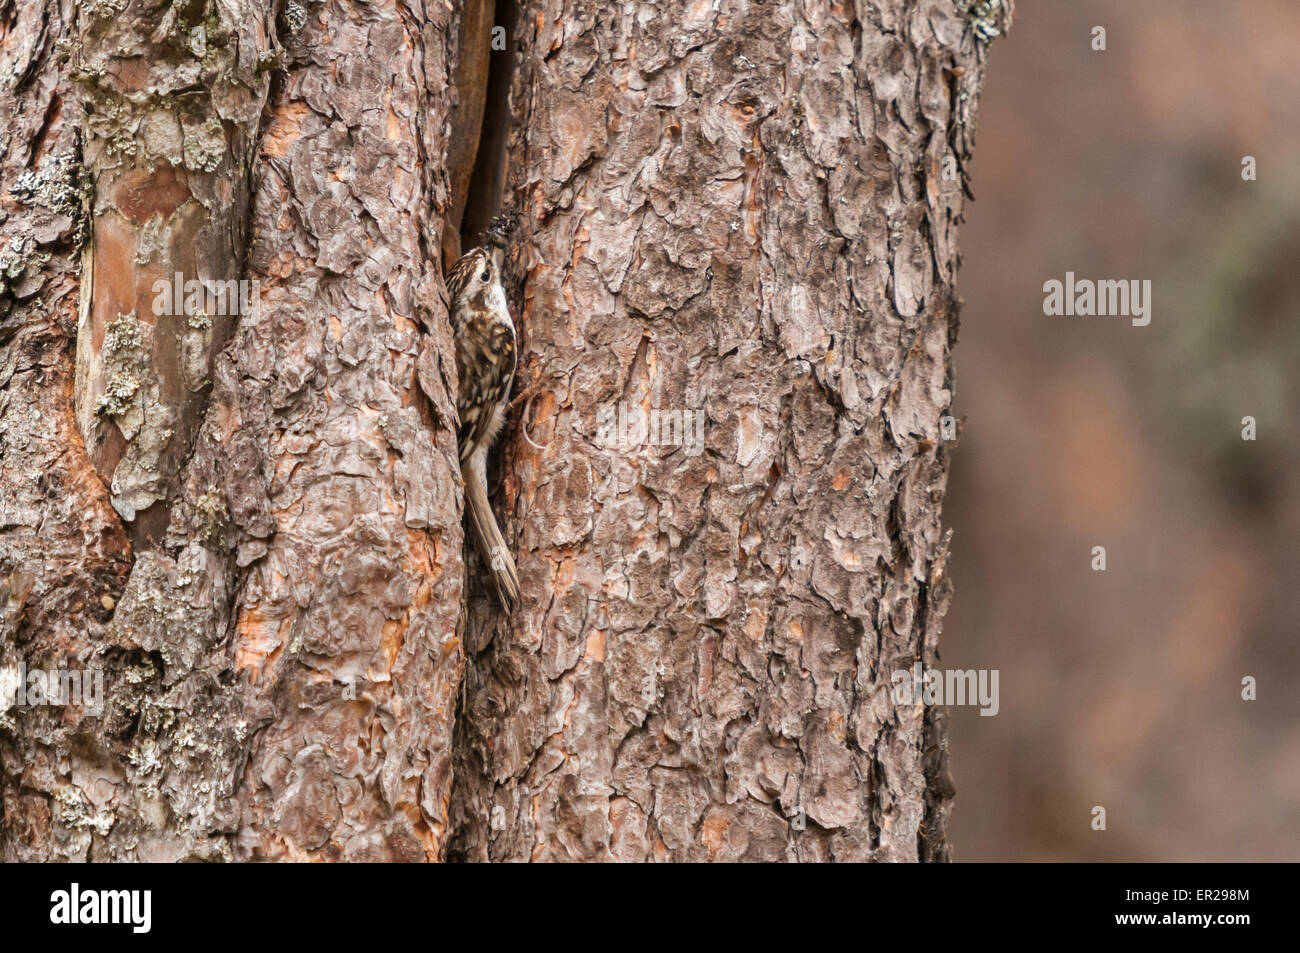 A common or Eurasian Tree Creeper, Certhia familiaris, with a beak full of food near it's nest in a gap in a pine tree bark. Stock Photo